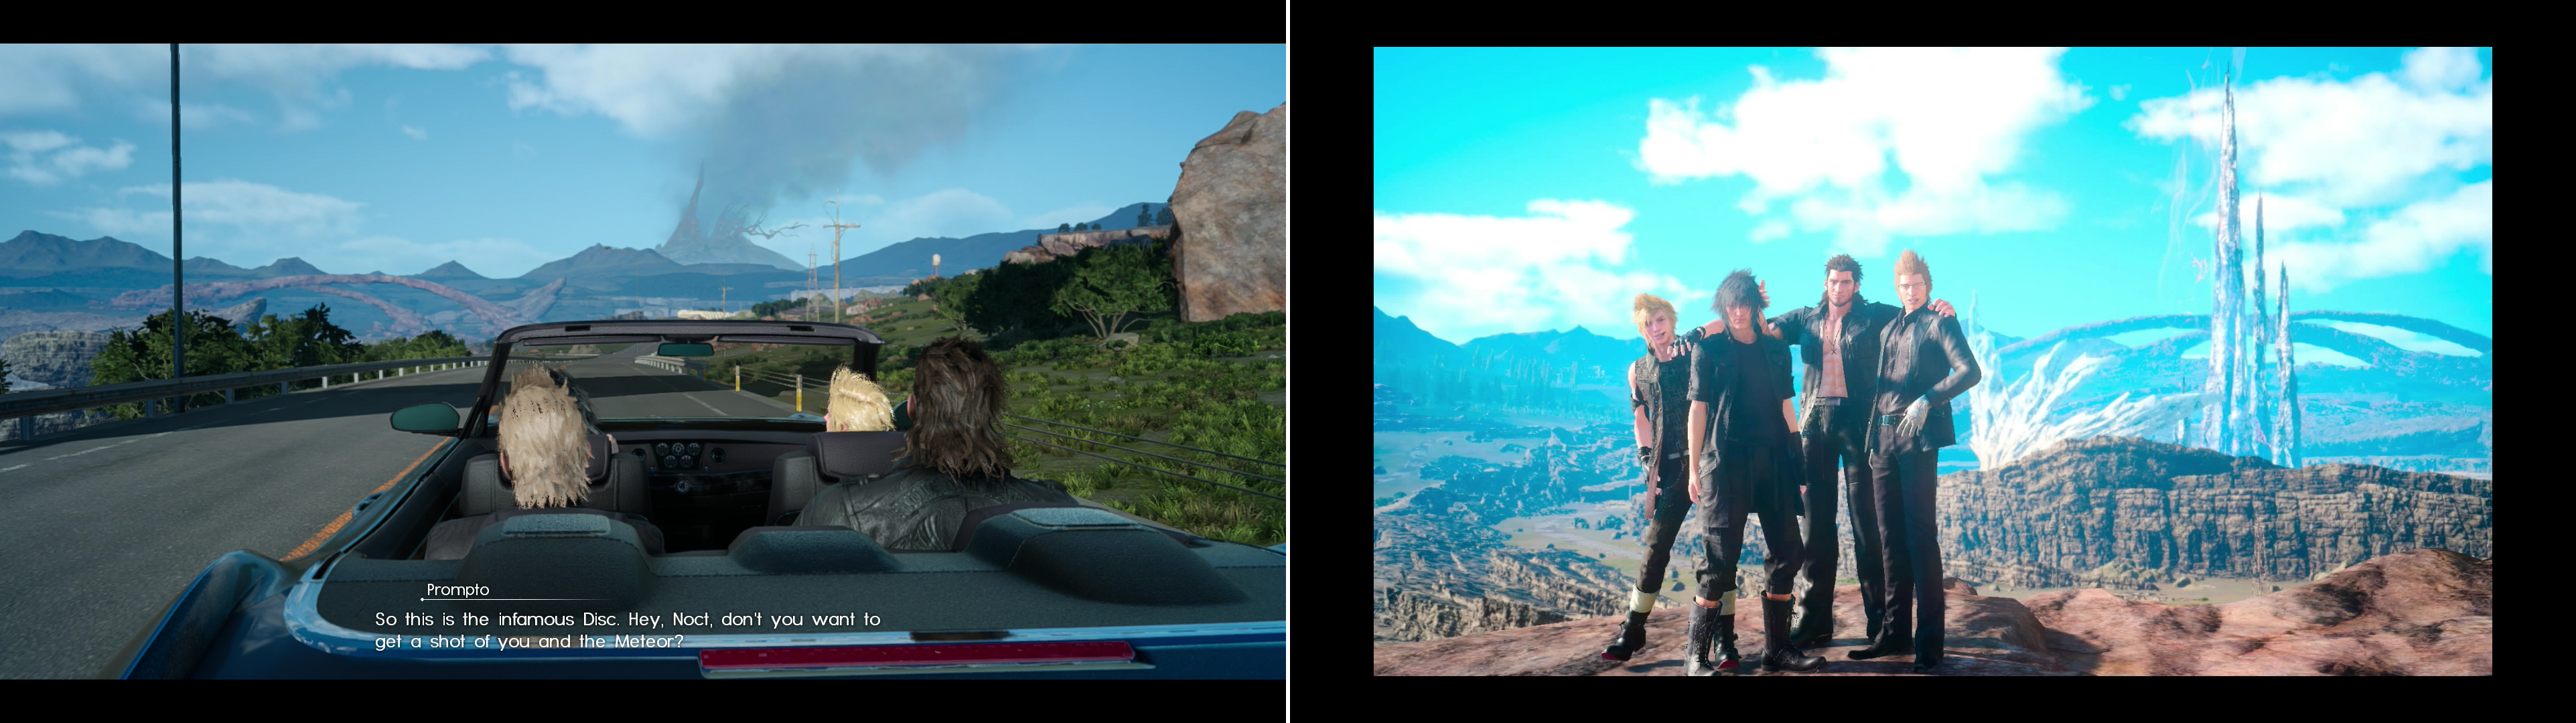 If you drive west from the Coernix Station - Alstor outpost, Prompto will notice the Disc of Cauthess (left) and bother you for a photo-op stop (right).